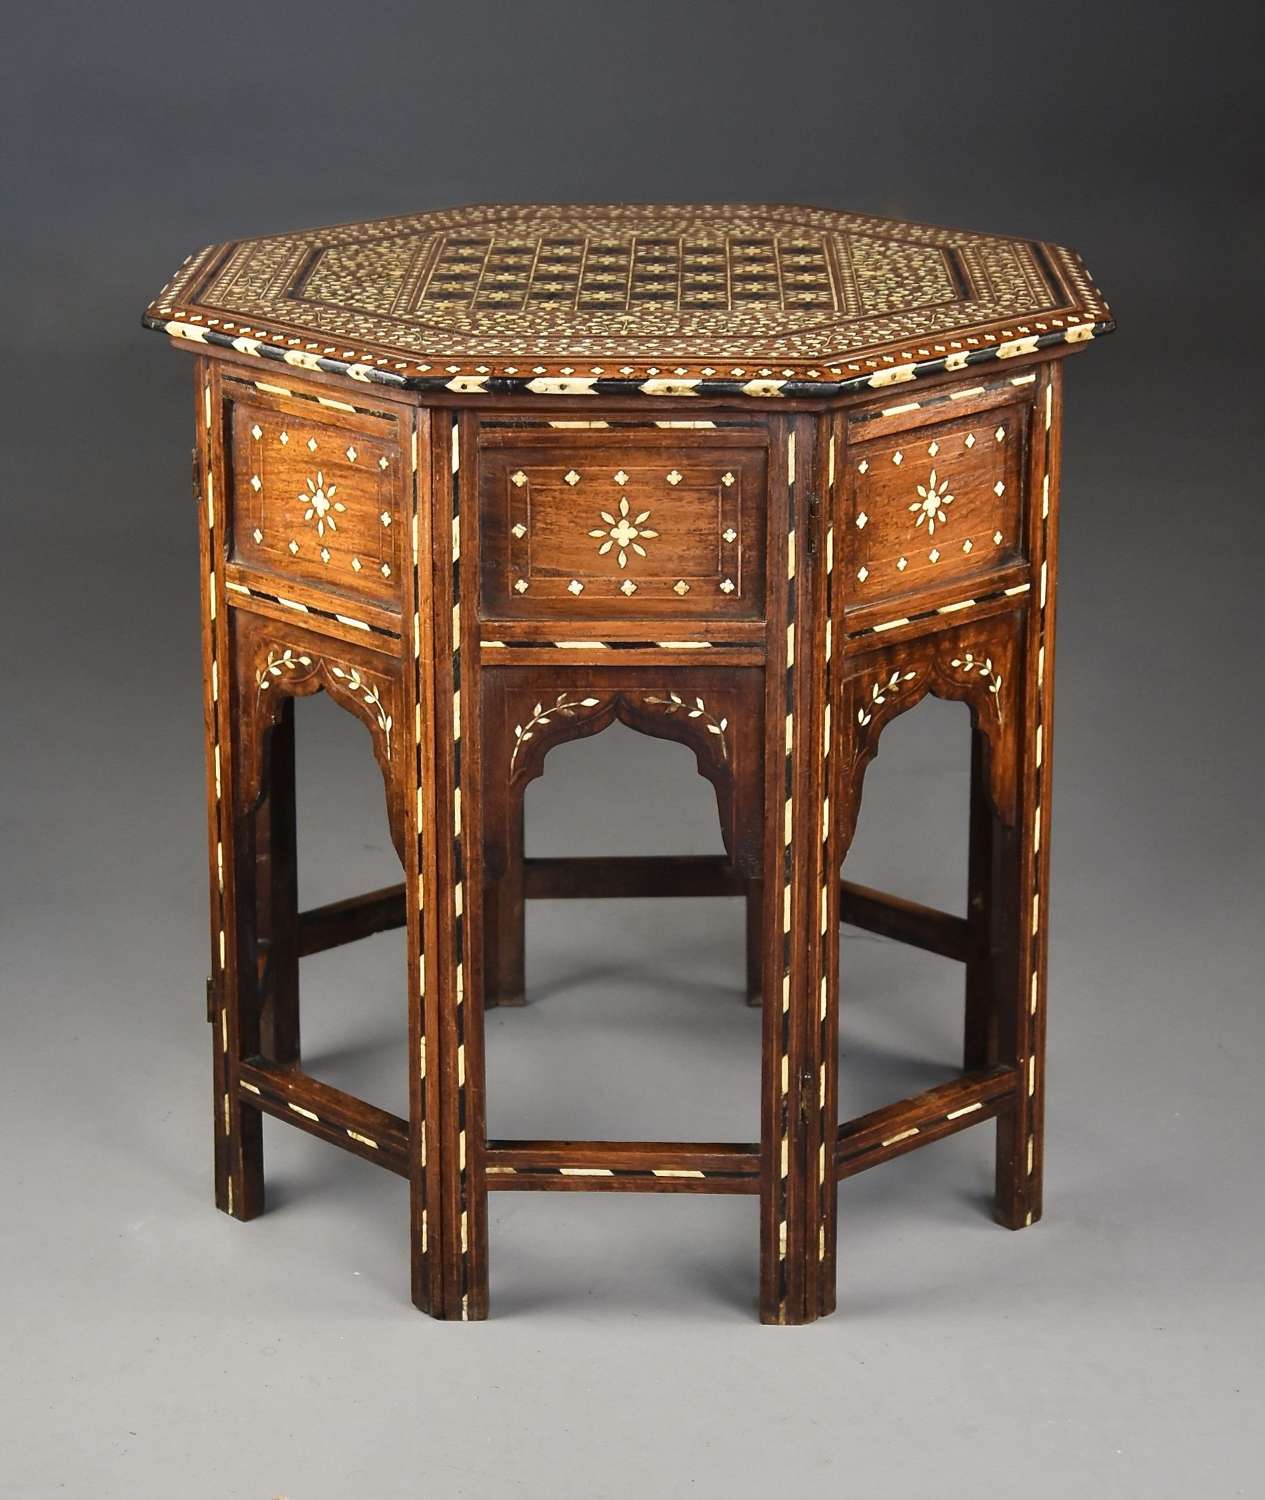 Fine quality late 19thc Anglo Indian ivory & ebony inlaid table